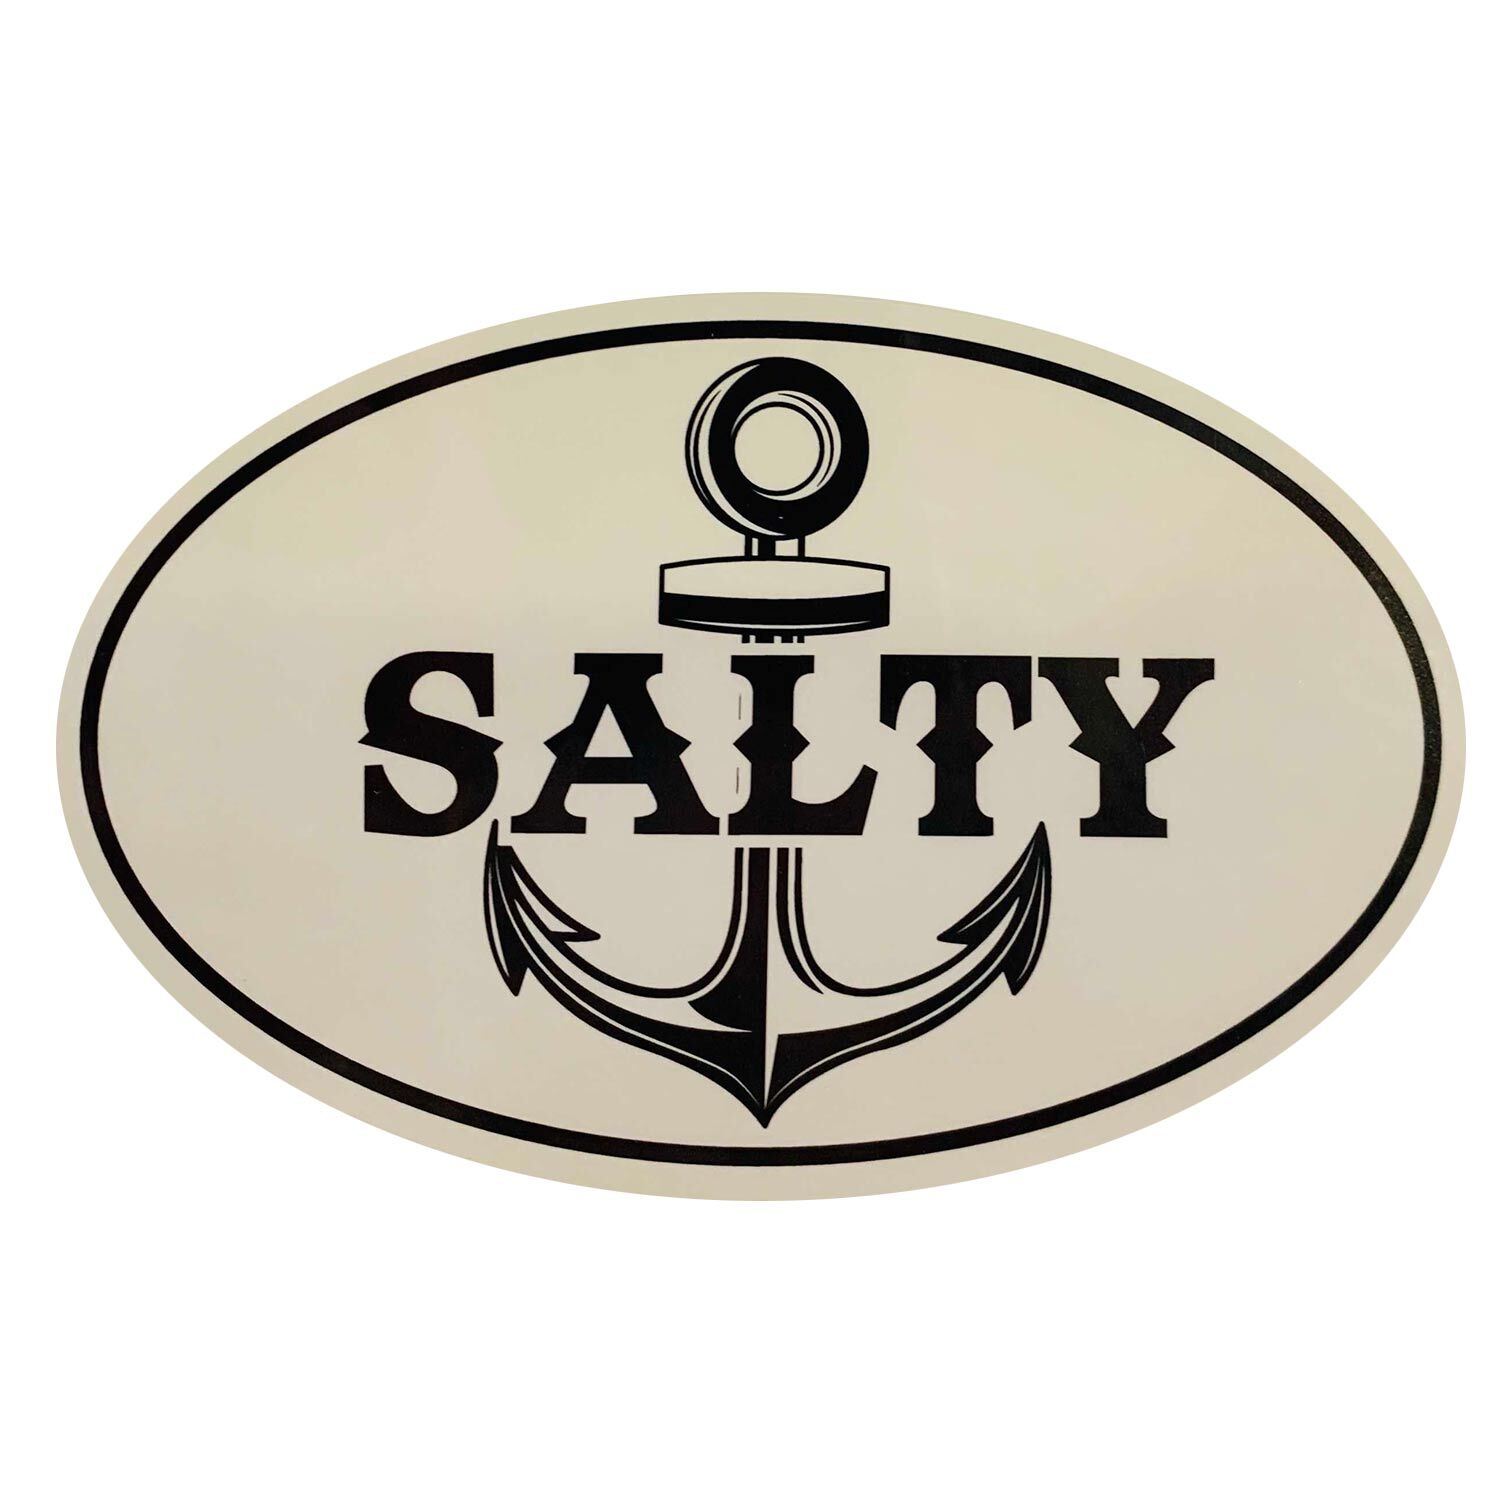 WEST MARINE Salty Removable/Restickable Boat Sticker